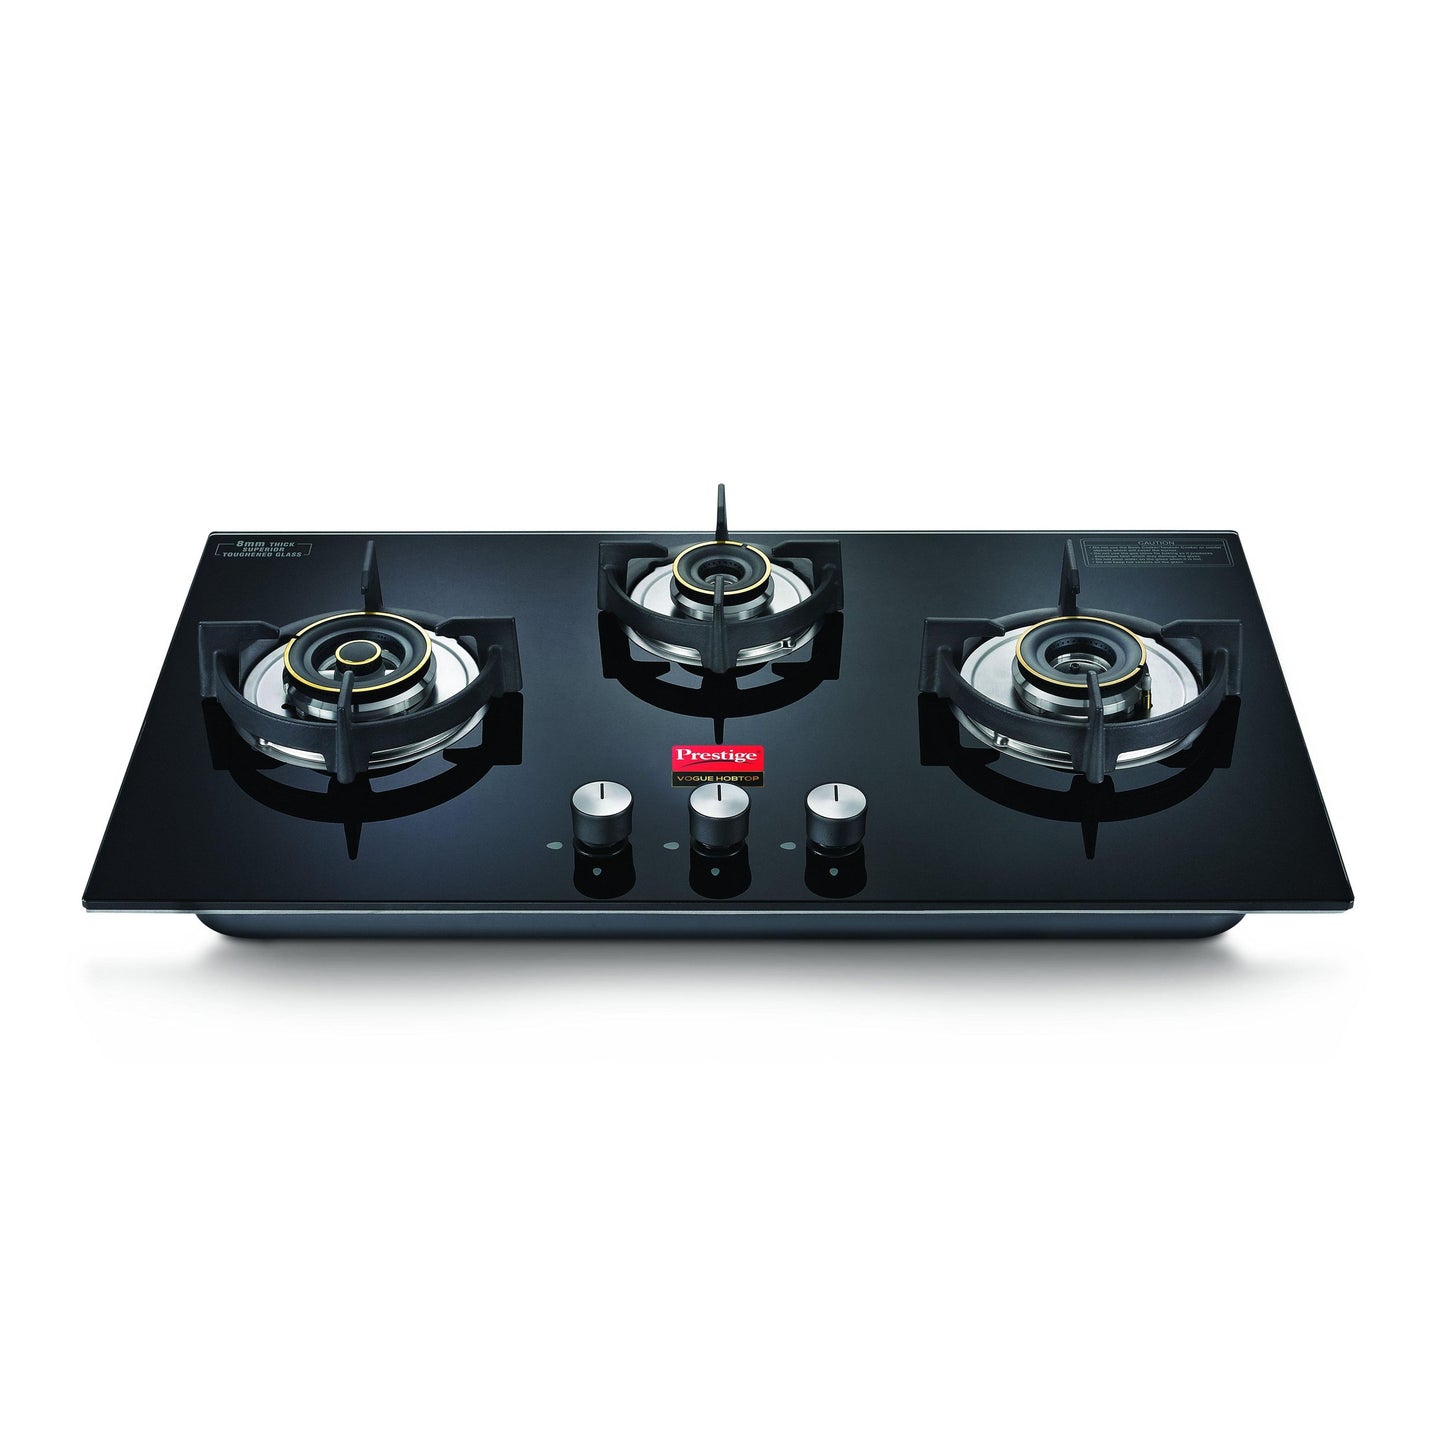 Prestige Vogue Hobtop PHTV 03 AI Glass Top Hob Gas Stove with One-Touch Advanced Auto-Ignition, 3 Burner